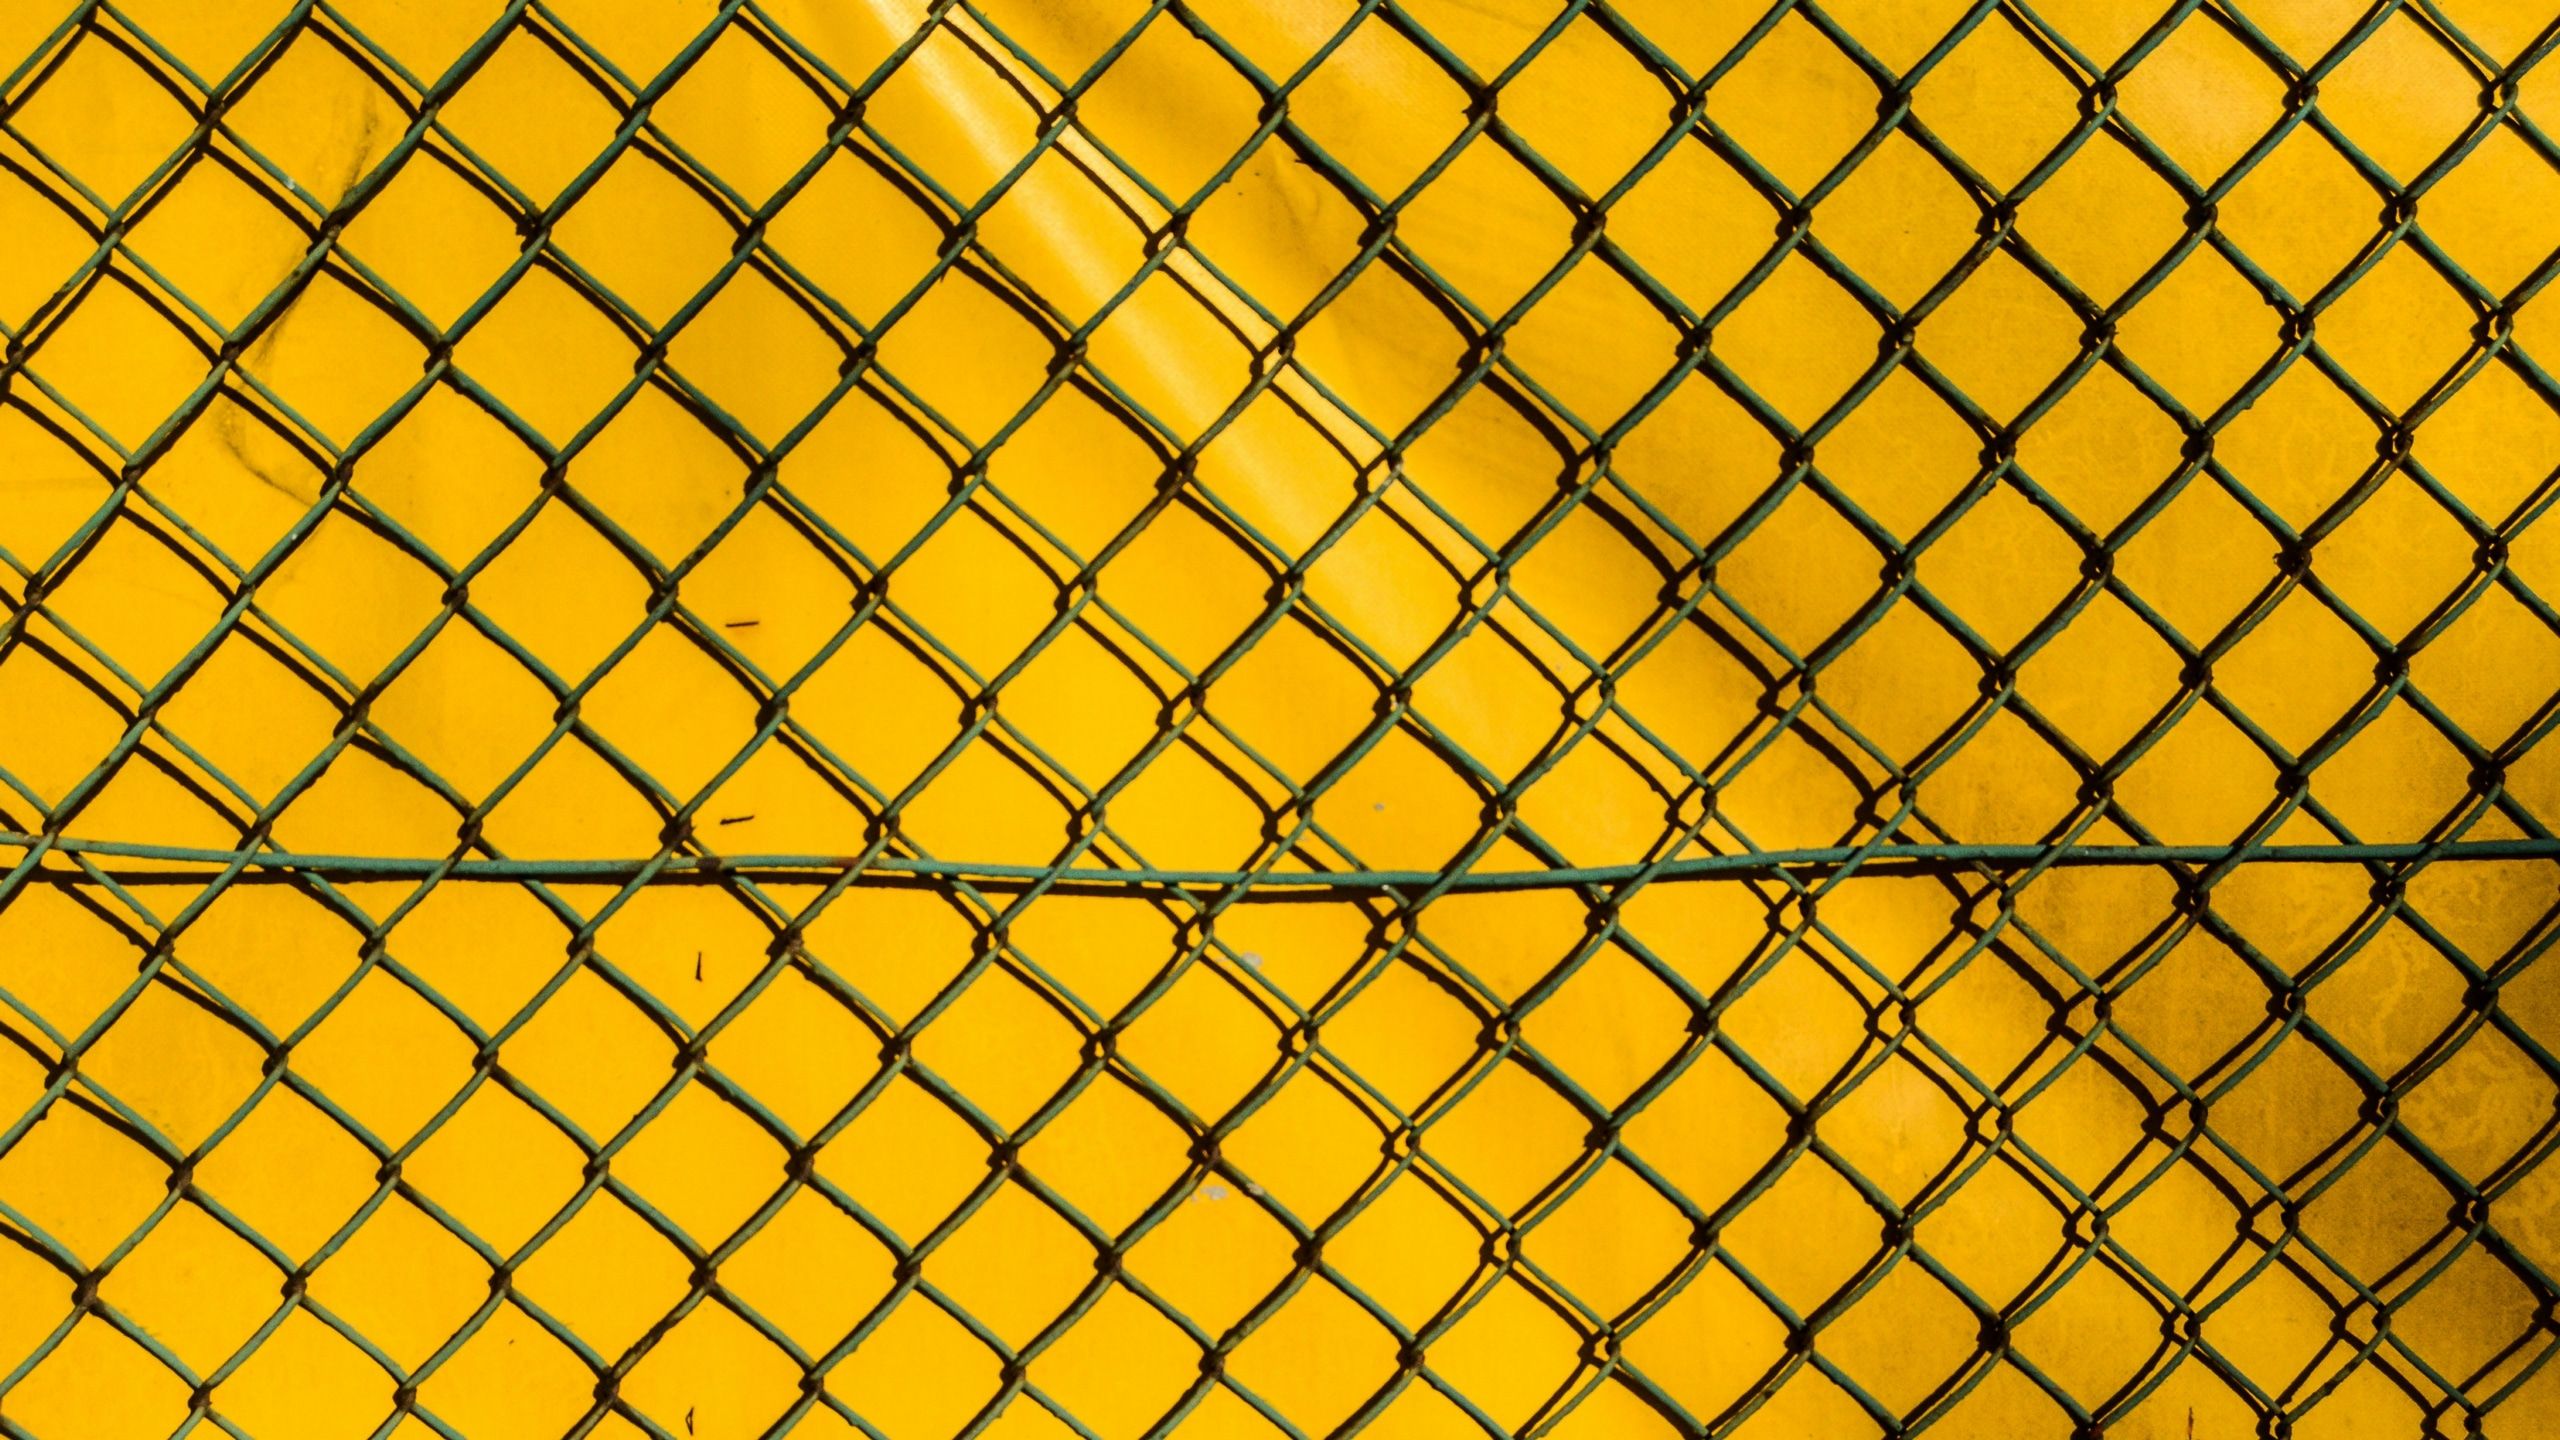 A yellow wall with a chain link fence in front of it - Grid